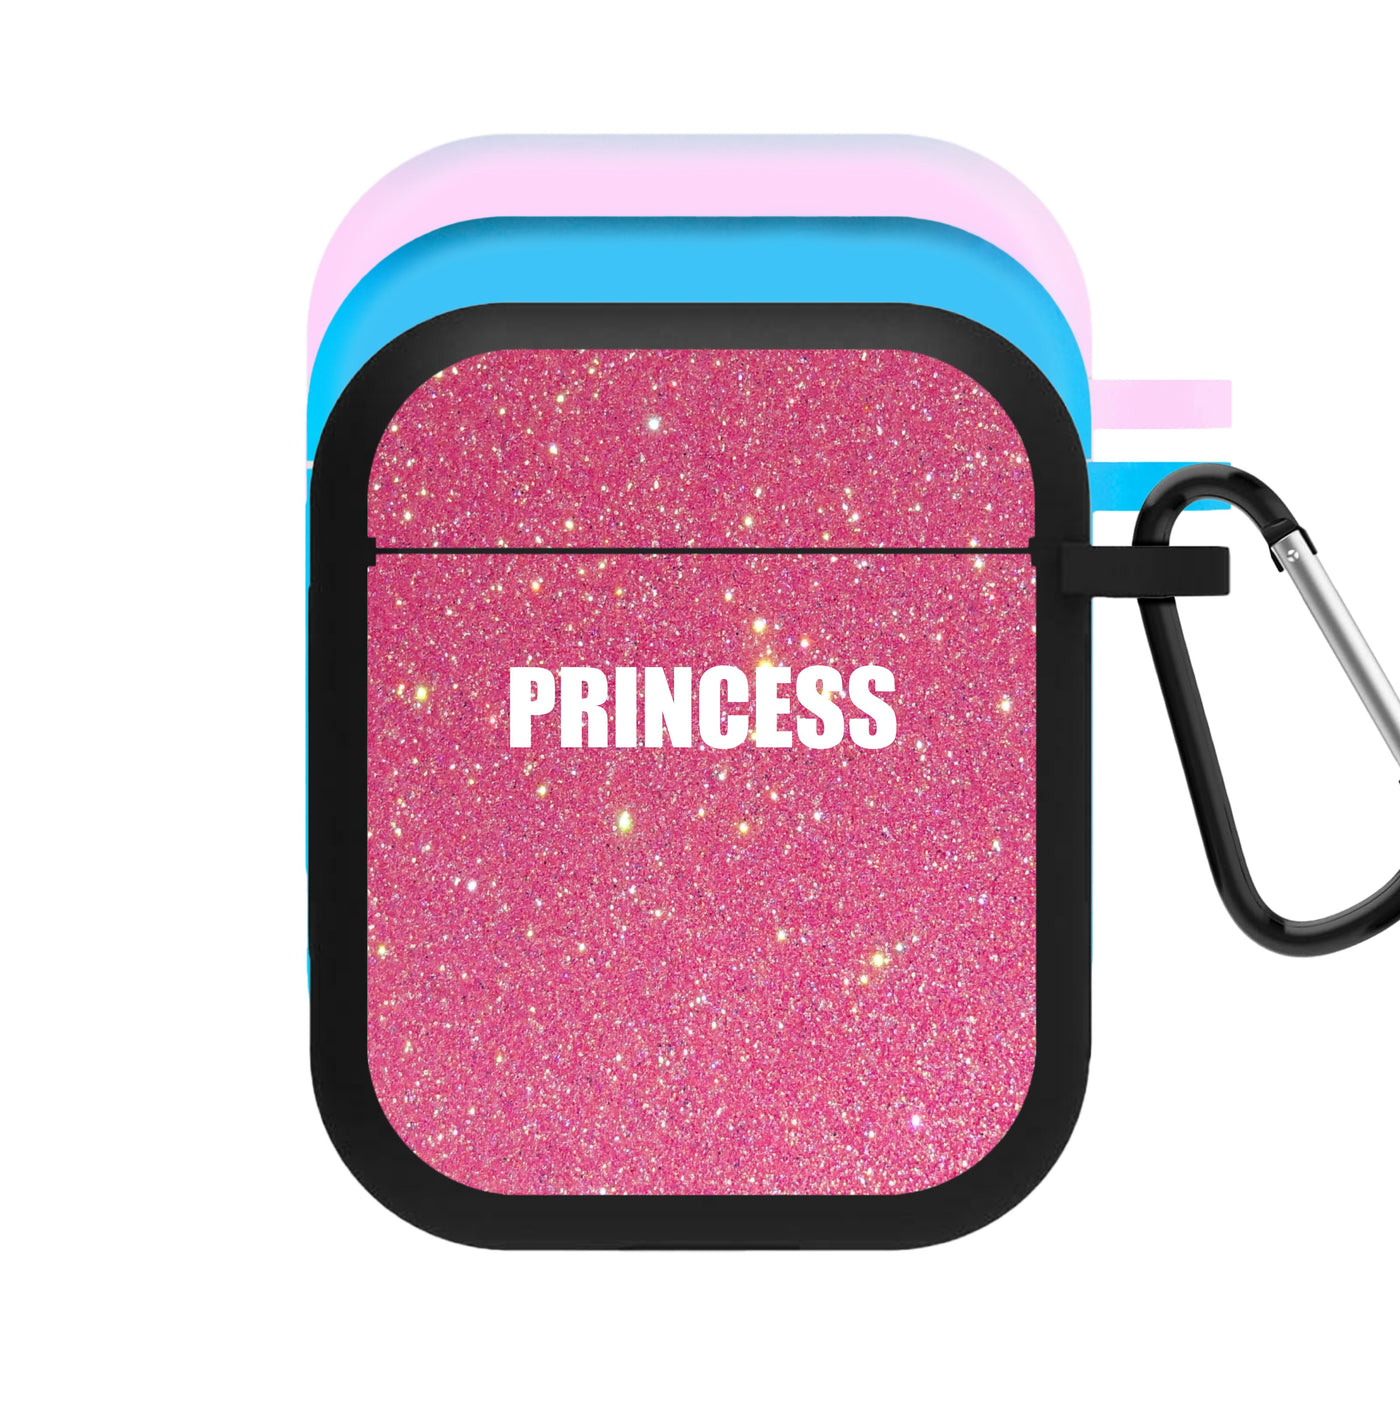 Glittery Pink Princess AirPods Case